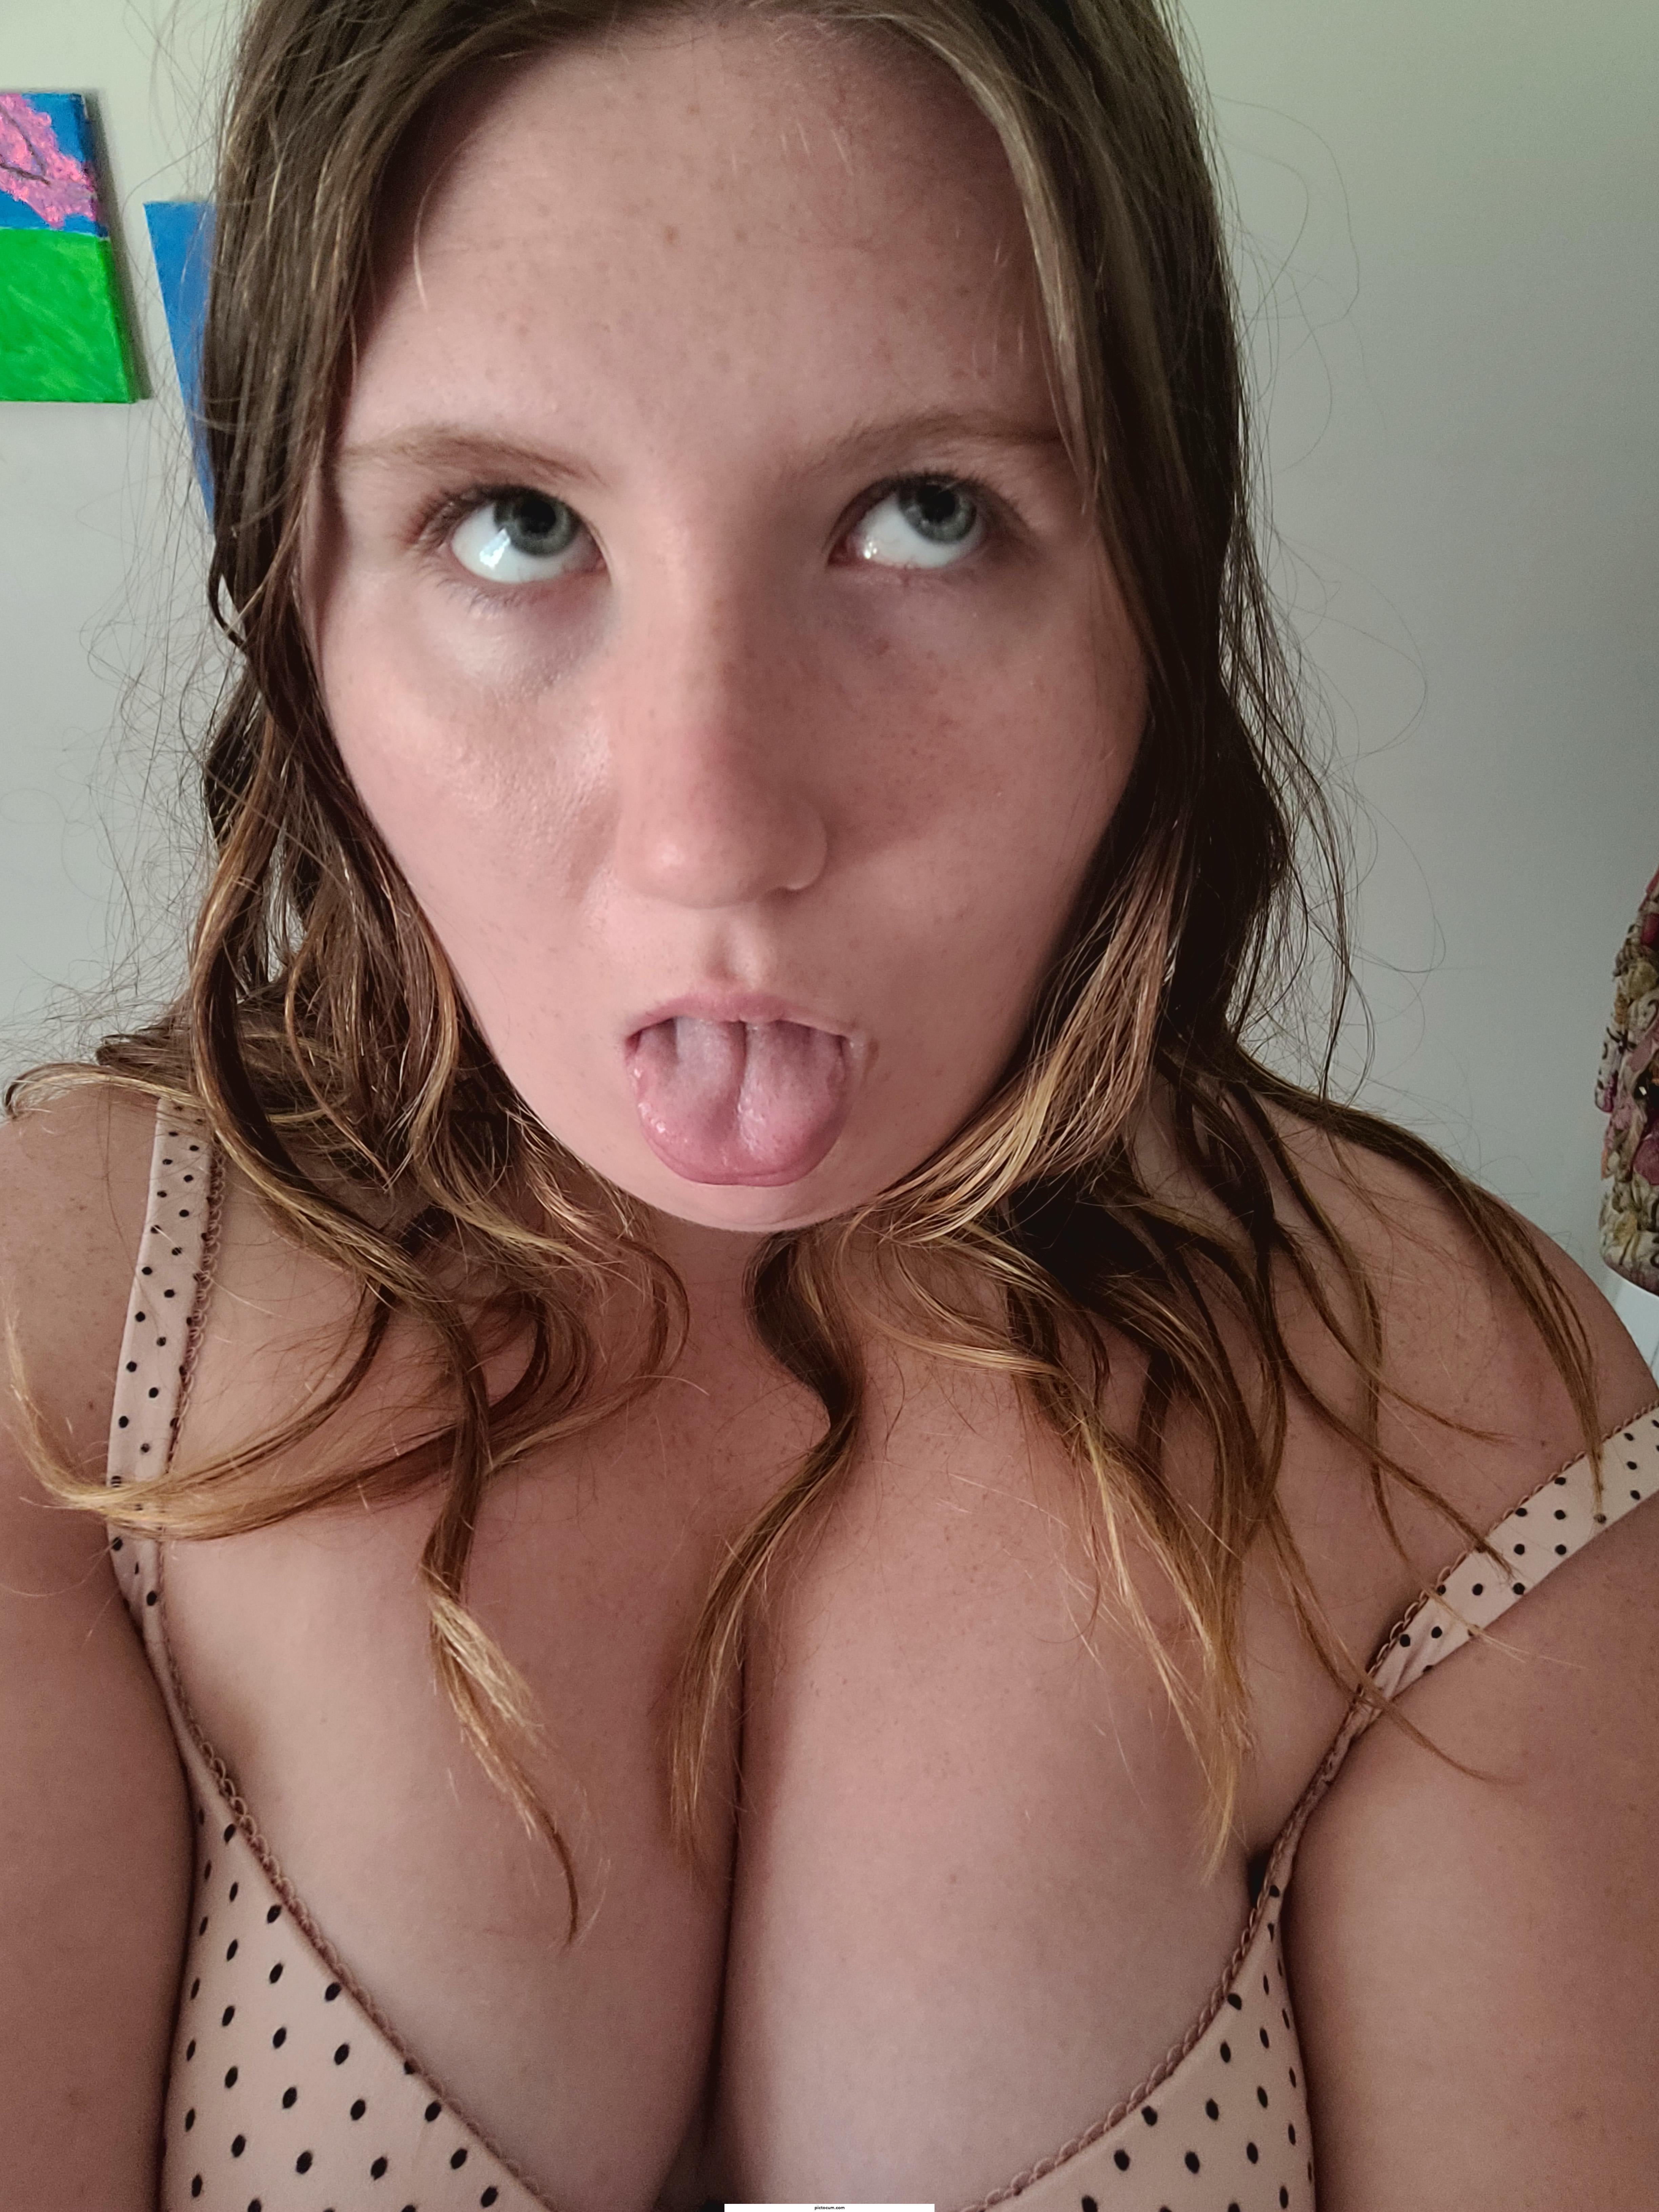 Is my ahegao good enough?